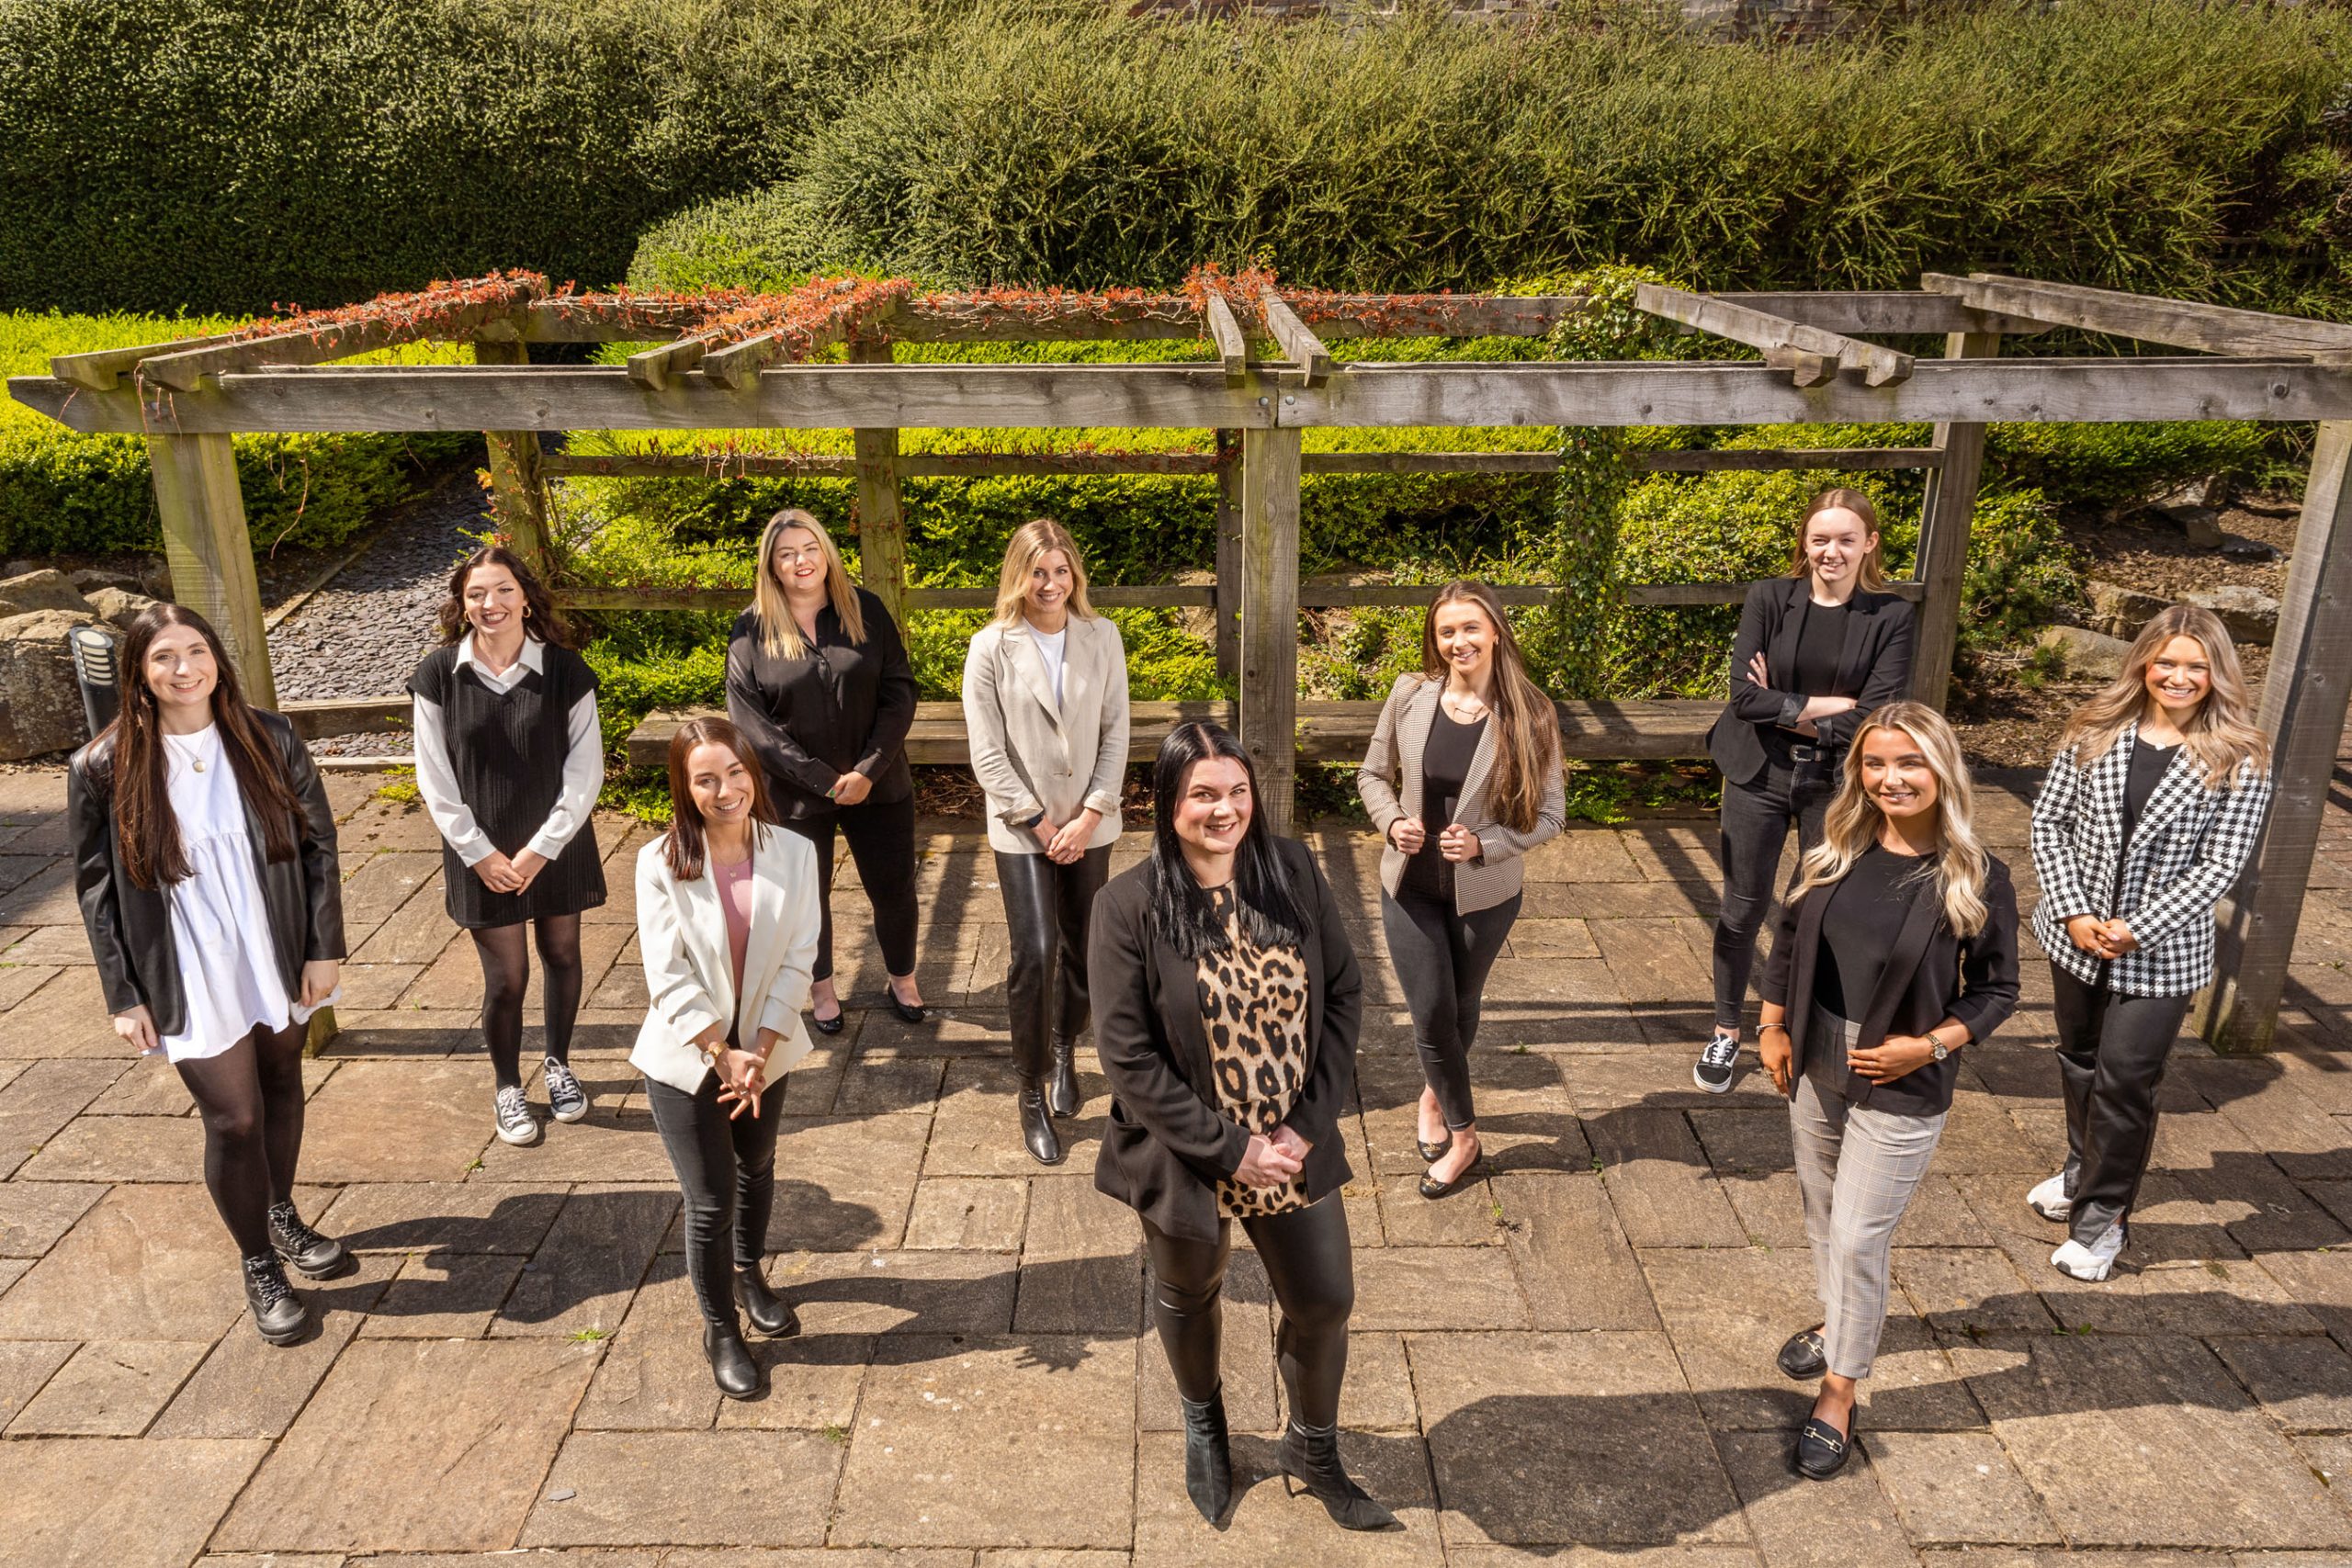 Healthcare Management Consultancy appoints Wild PR to reach business goals